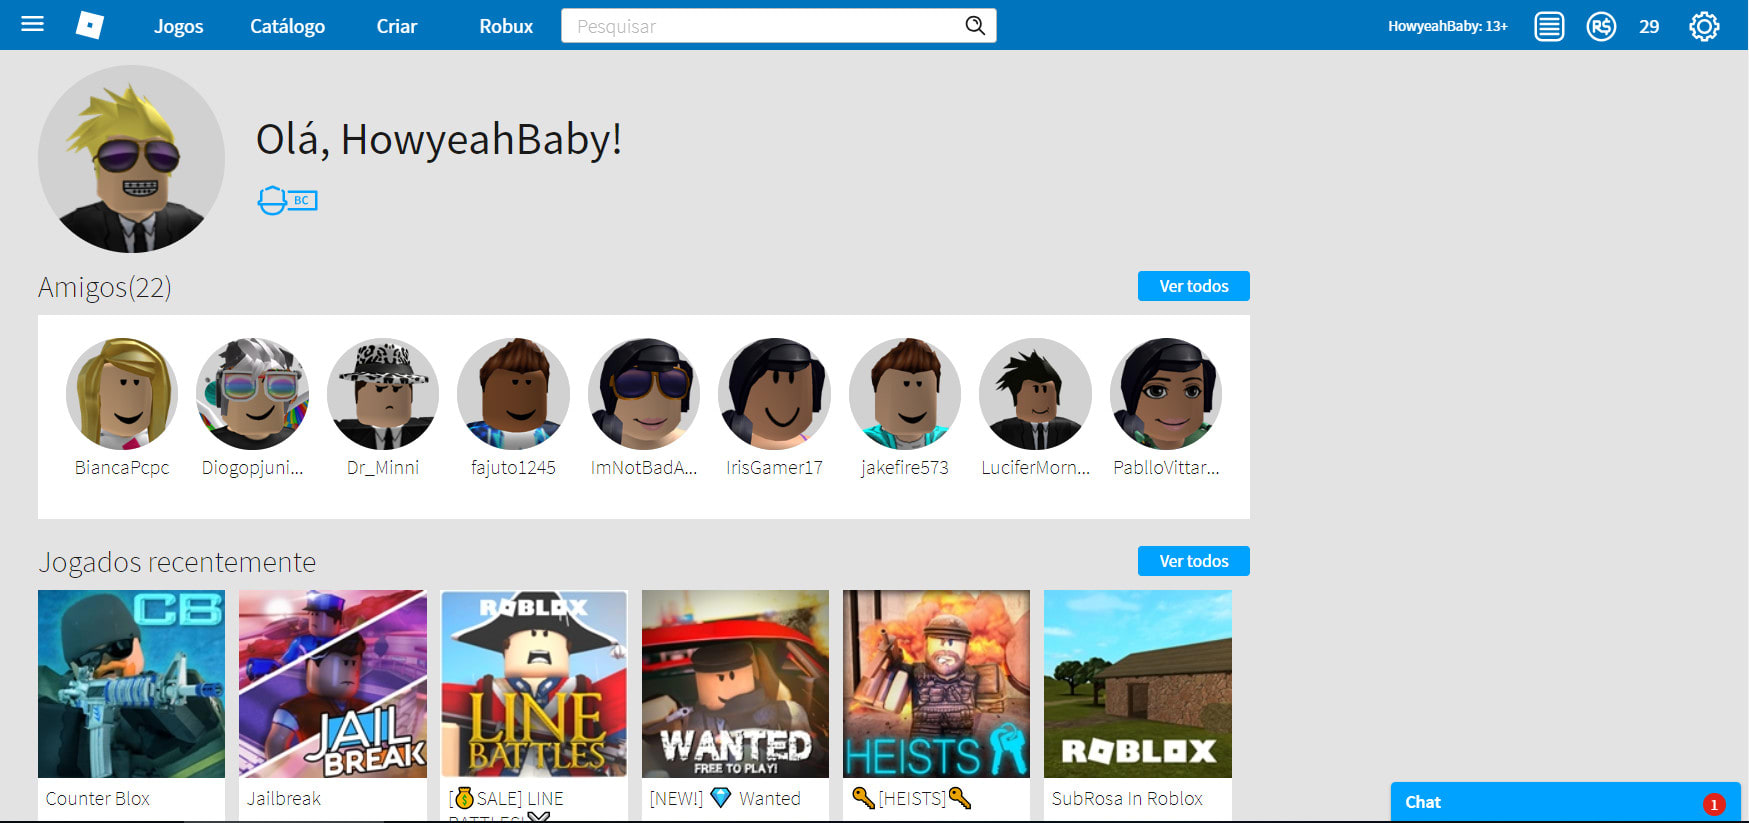 Play With You Roblox Csgo Minecraft Ets2 Creativerse Etc By